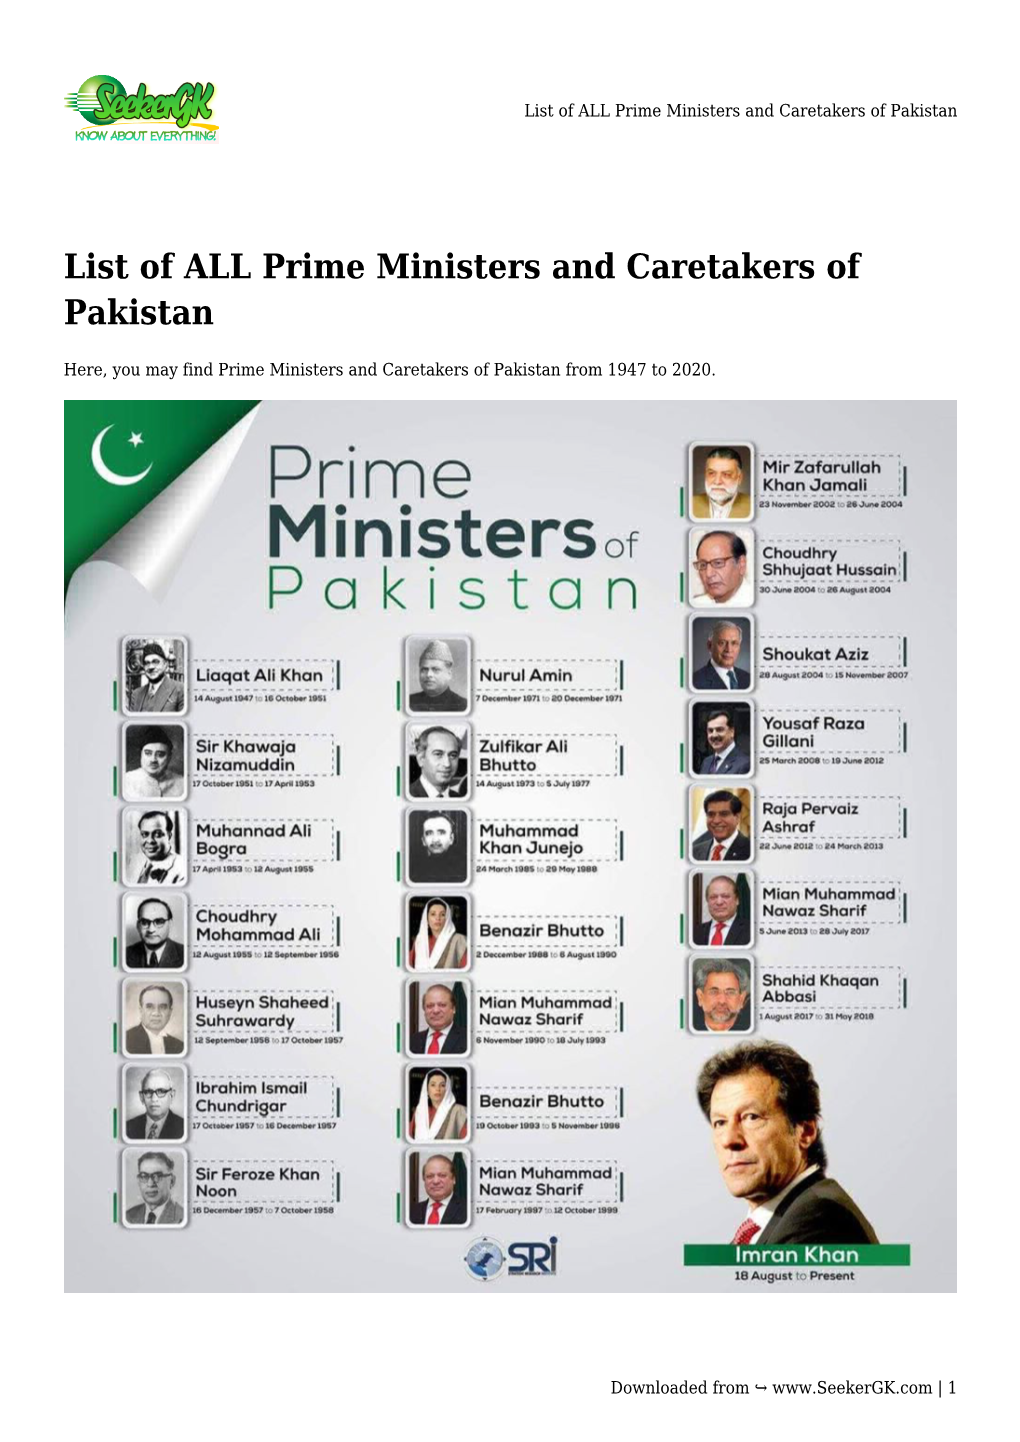 List of ALL Prime Ministers and Caretakers of Pakistan